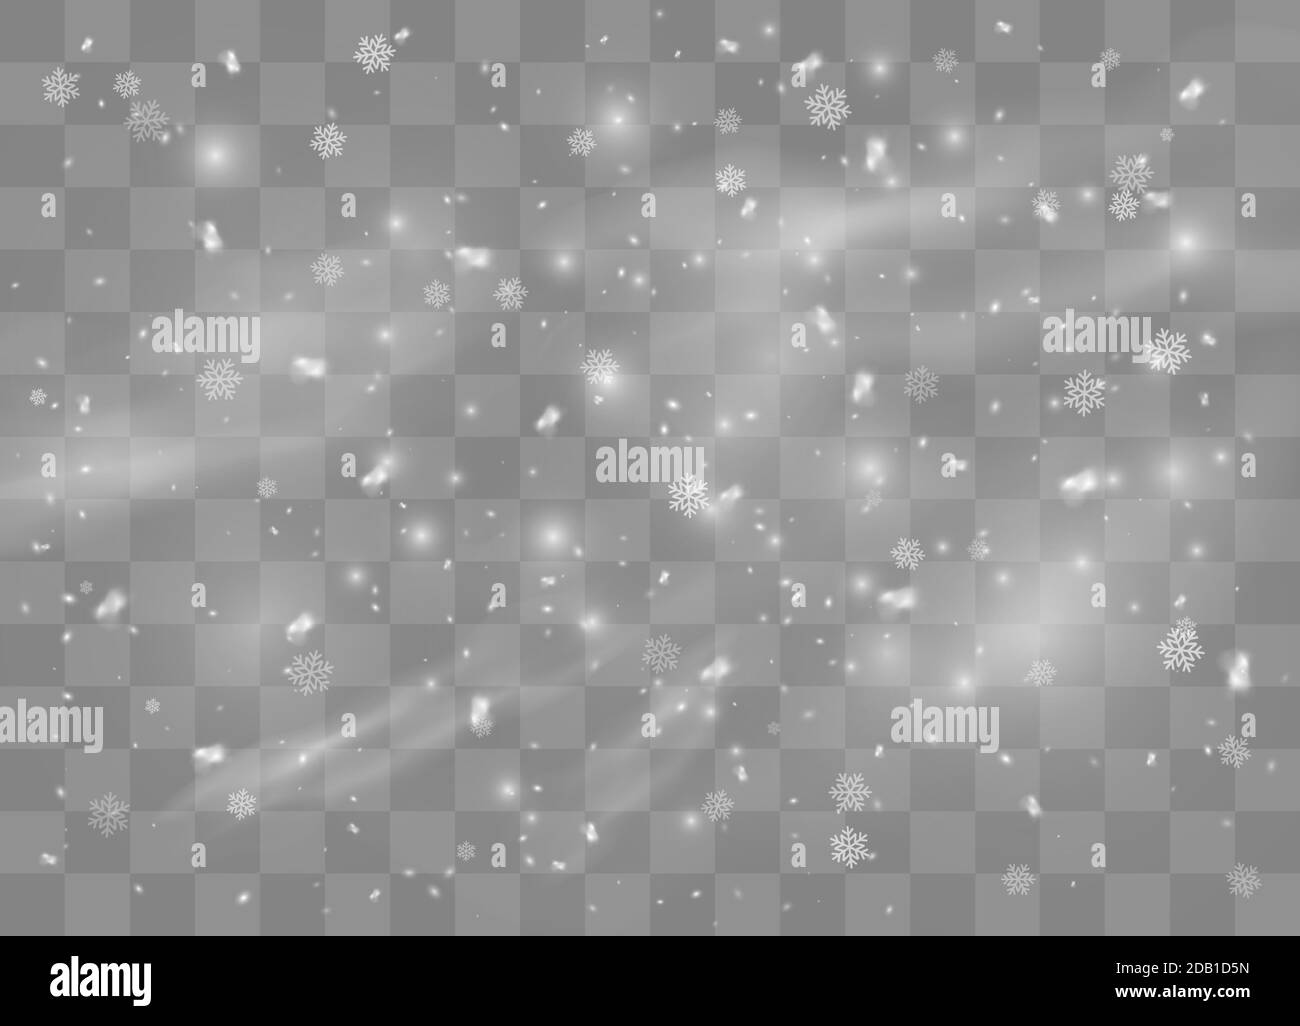 Falling. Christmas snow for the new year.  Heavy snowfall, snowflakes in different shapes and forms. Vector illustration. Stock Vector